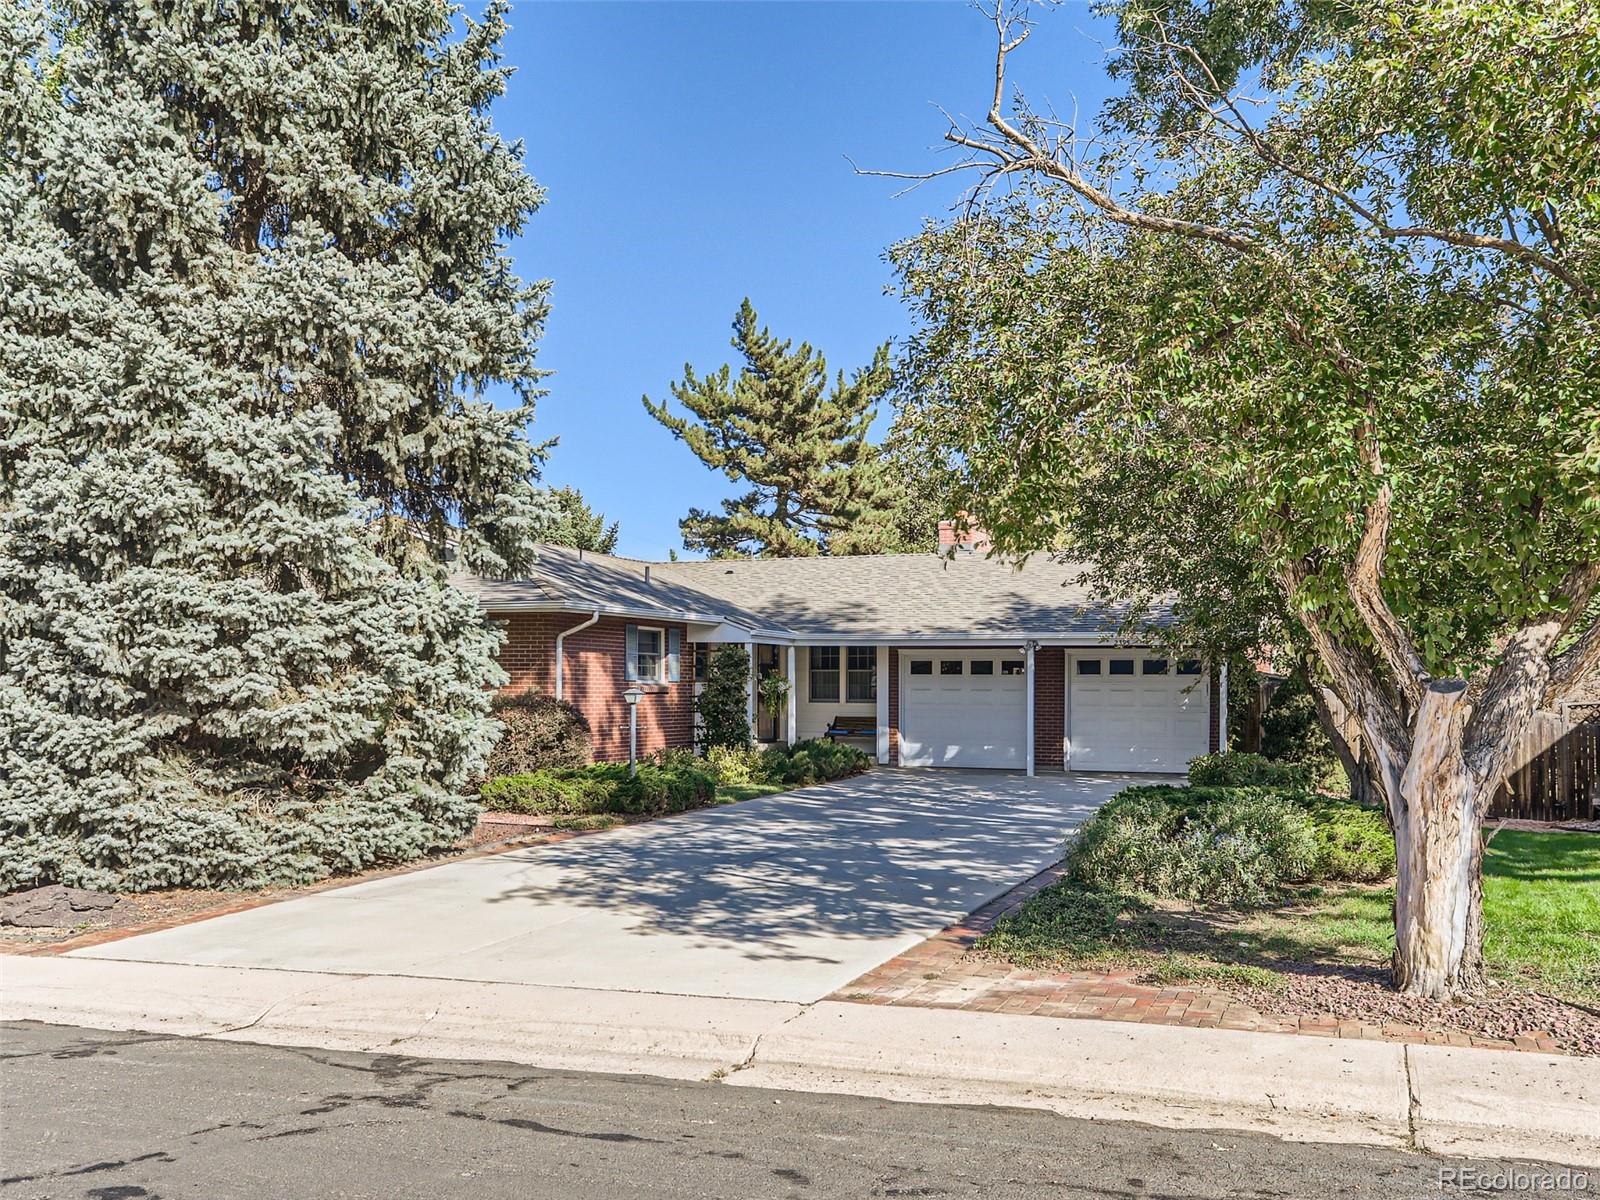 2395 w davies avenue, Littleton sold home. Closed on 2024-04-15 for $705,000.